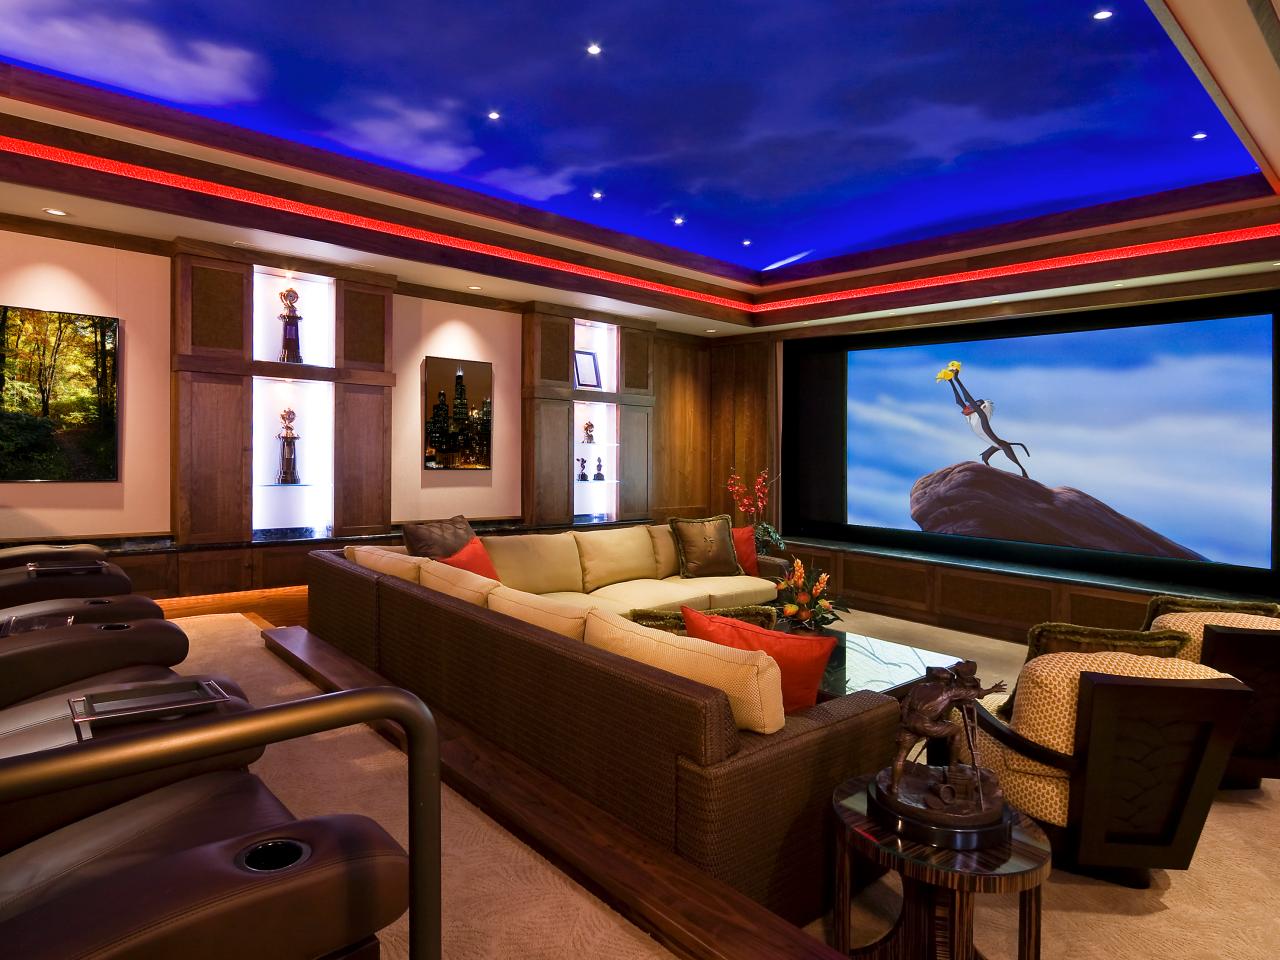 Choosing A Room For A Home Theater Hgtv with Home Movie Theatre Decorating Ideas